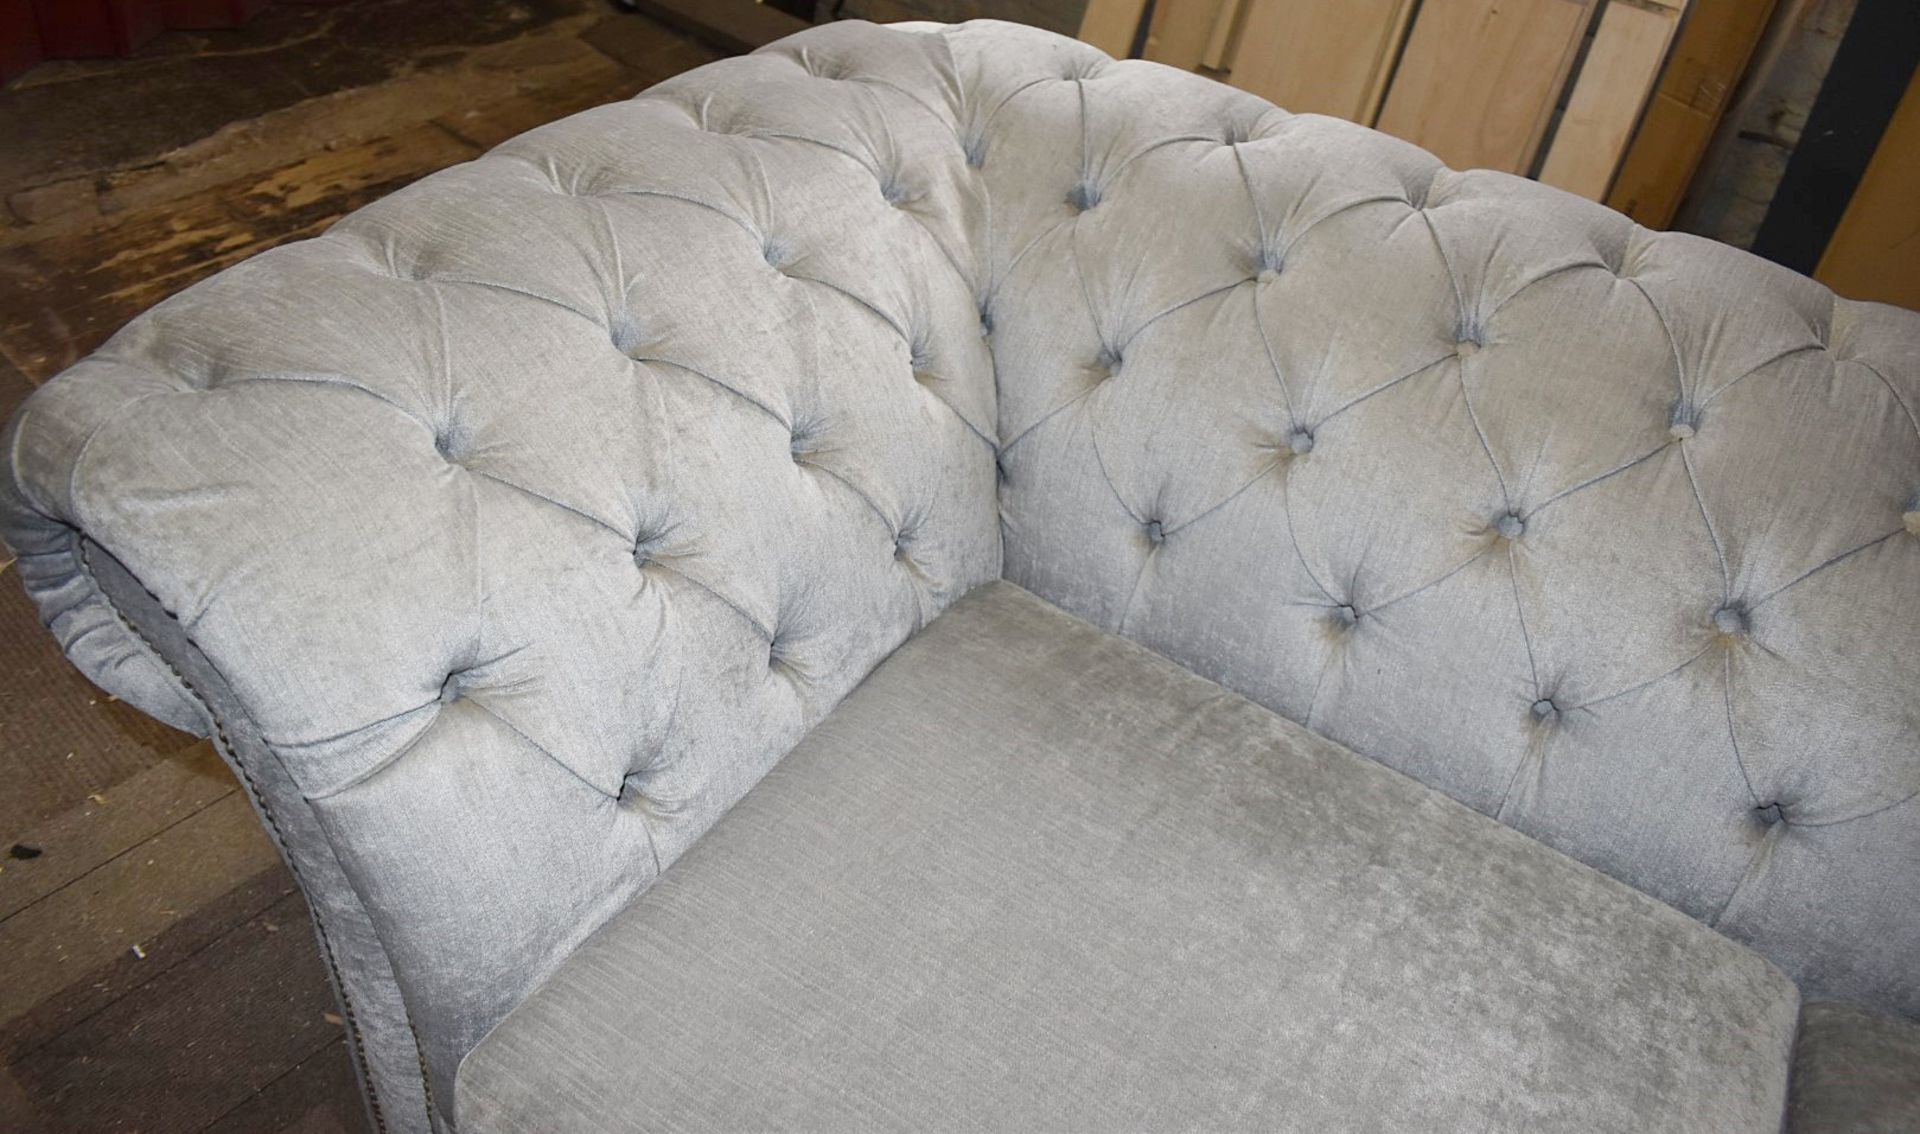 1 x Chesterfield-style Velvet Upholstered Sofa, on Castors, 2.2-Metres Wide  - Luxury Furniture - Image 3 of 14